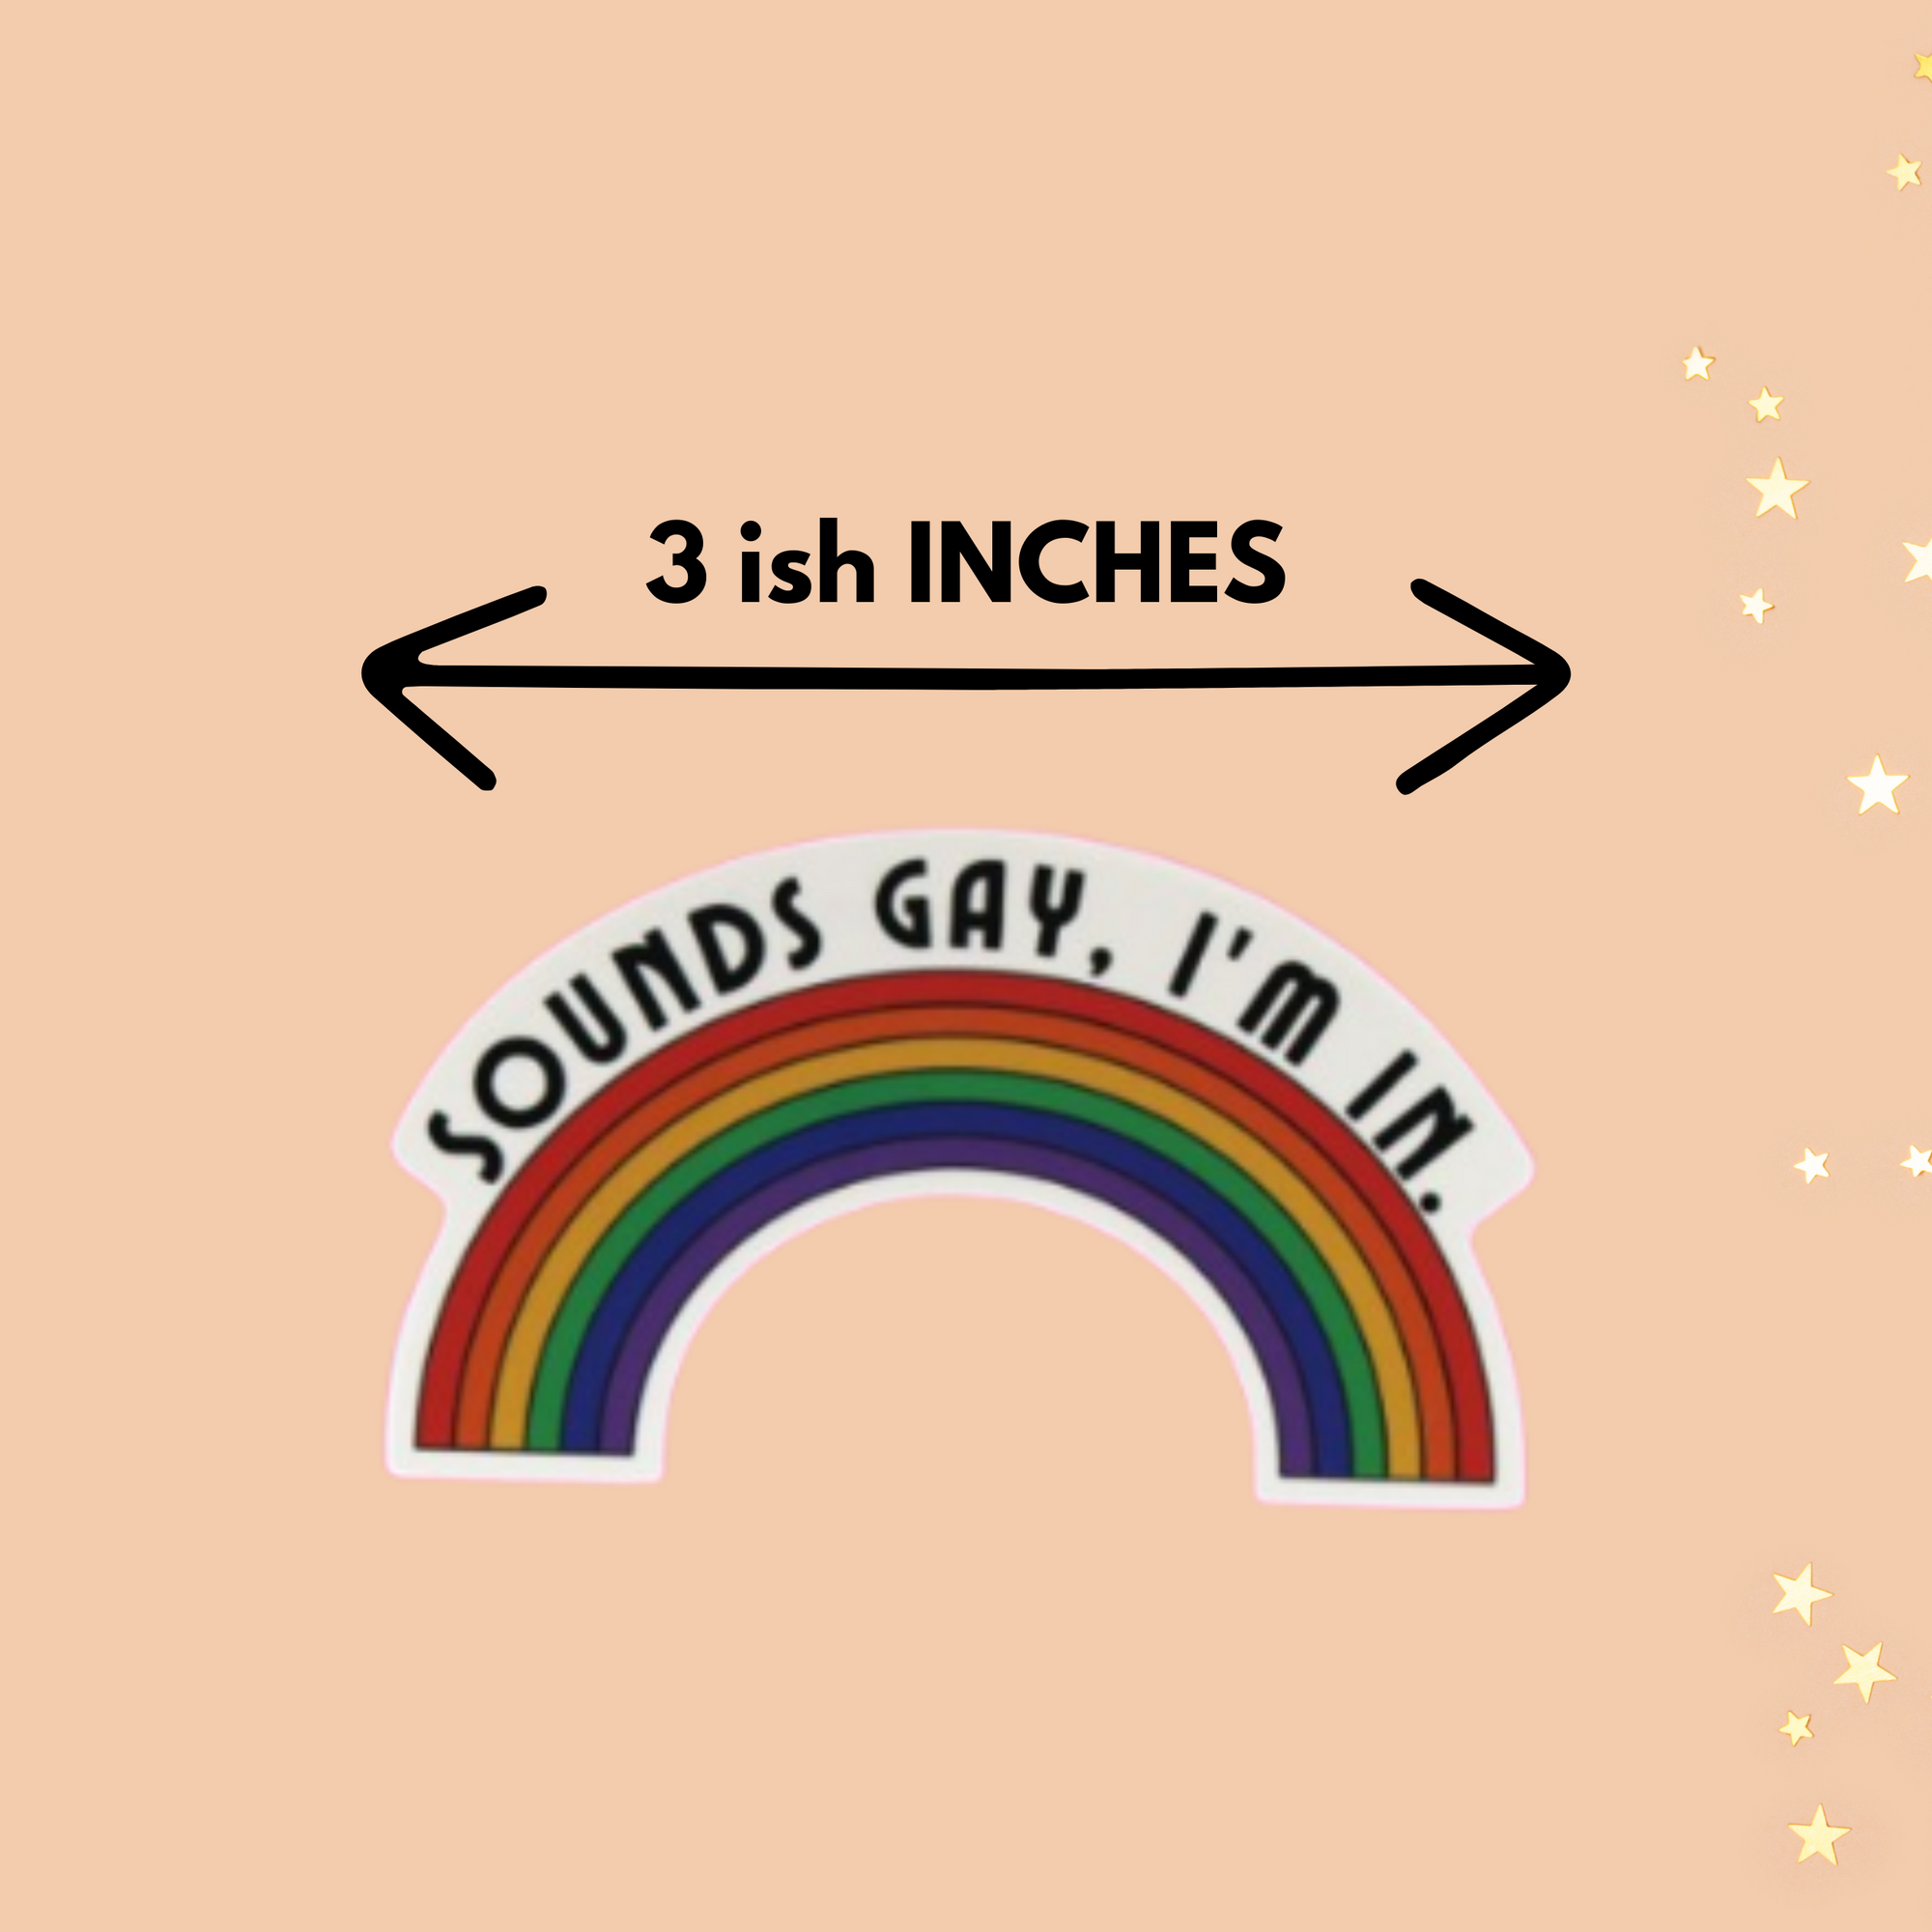 Sounds Gay, I'm In Sticker